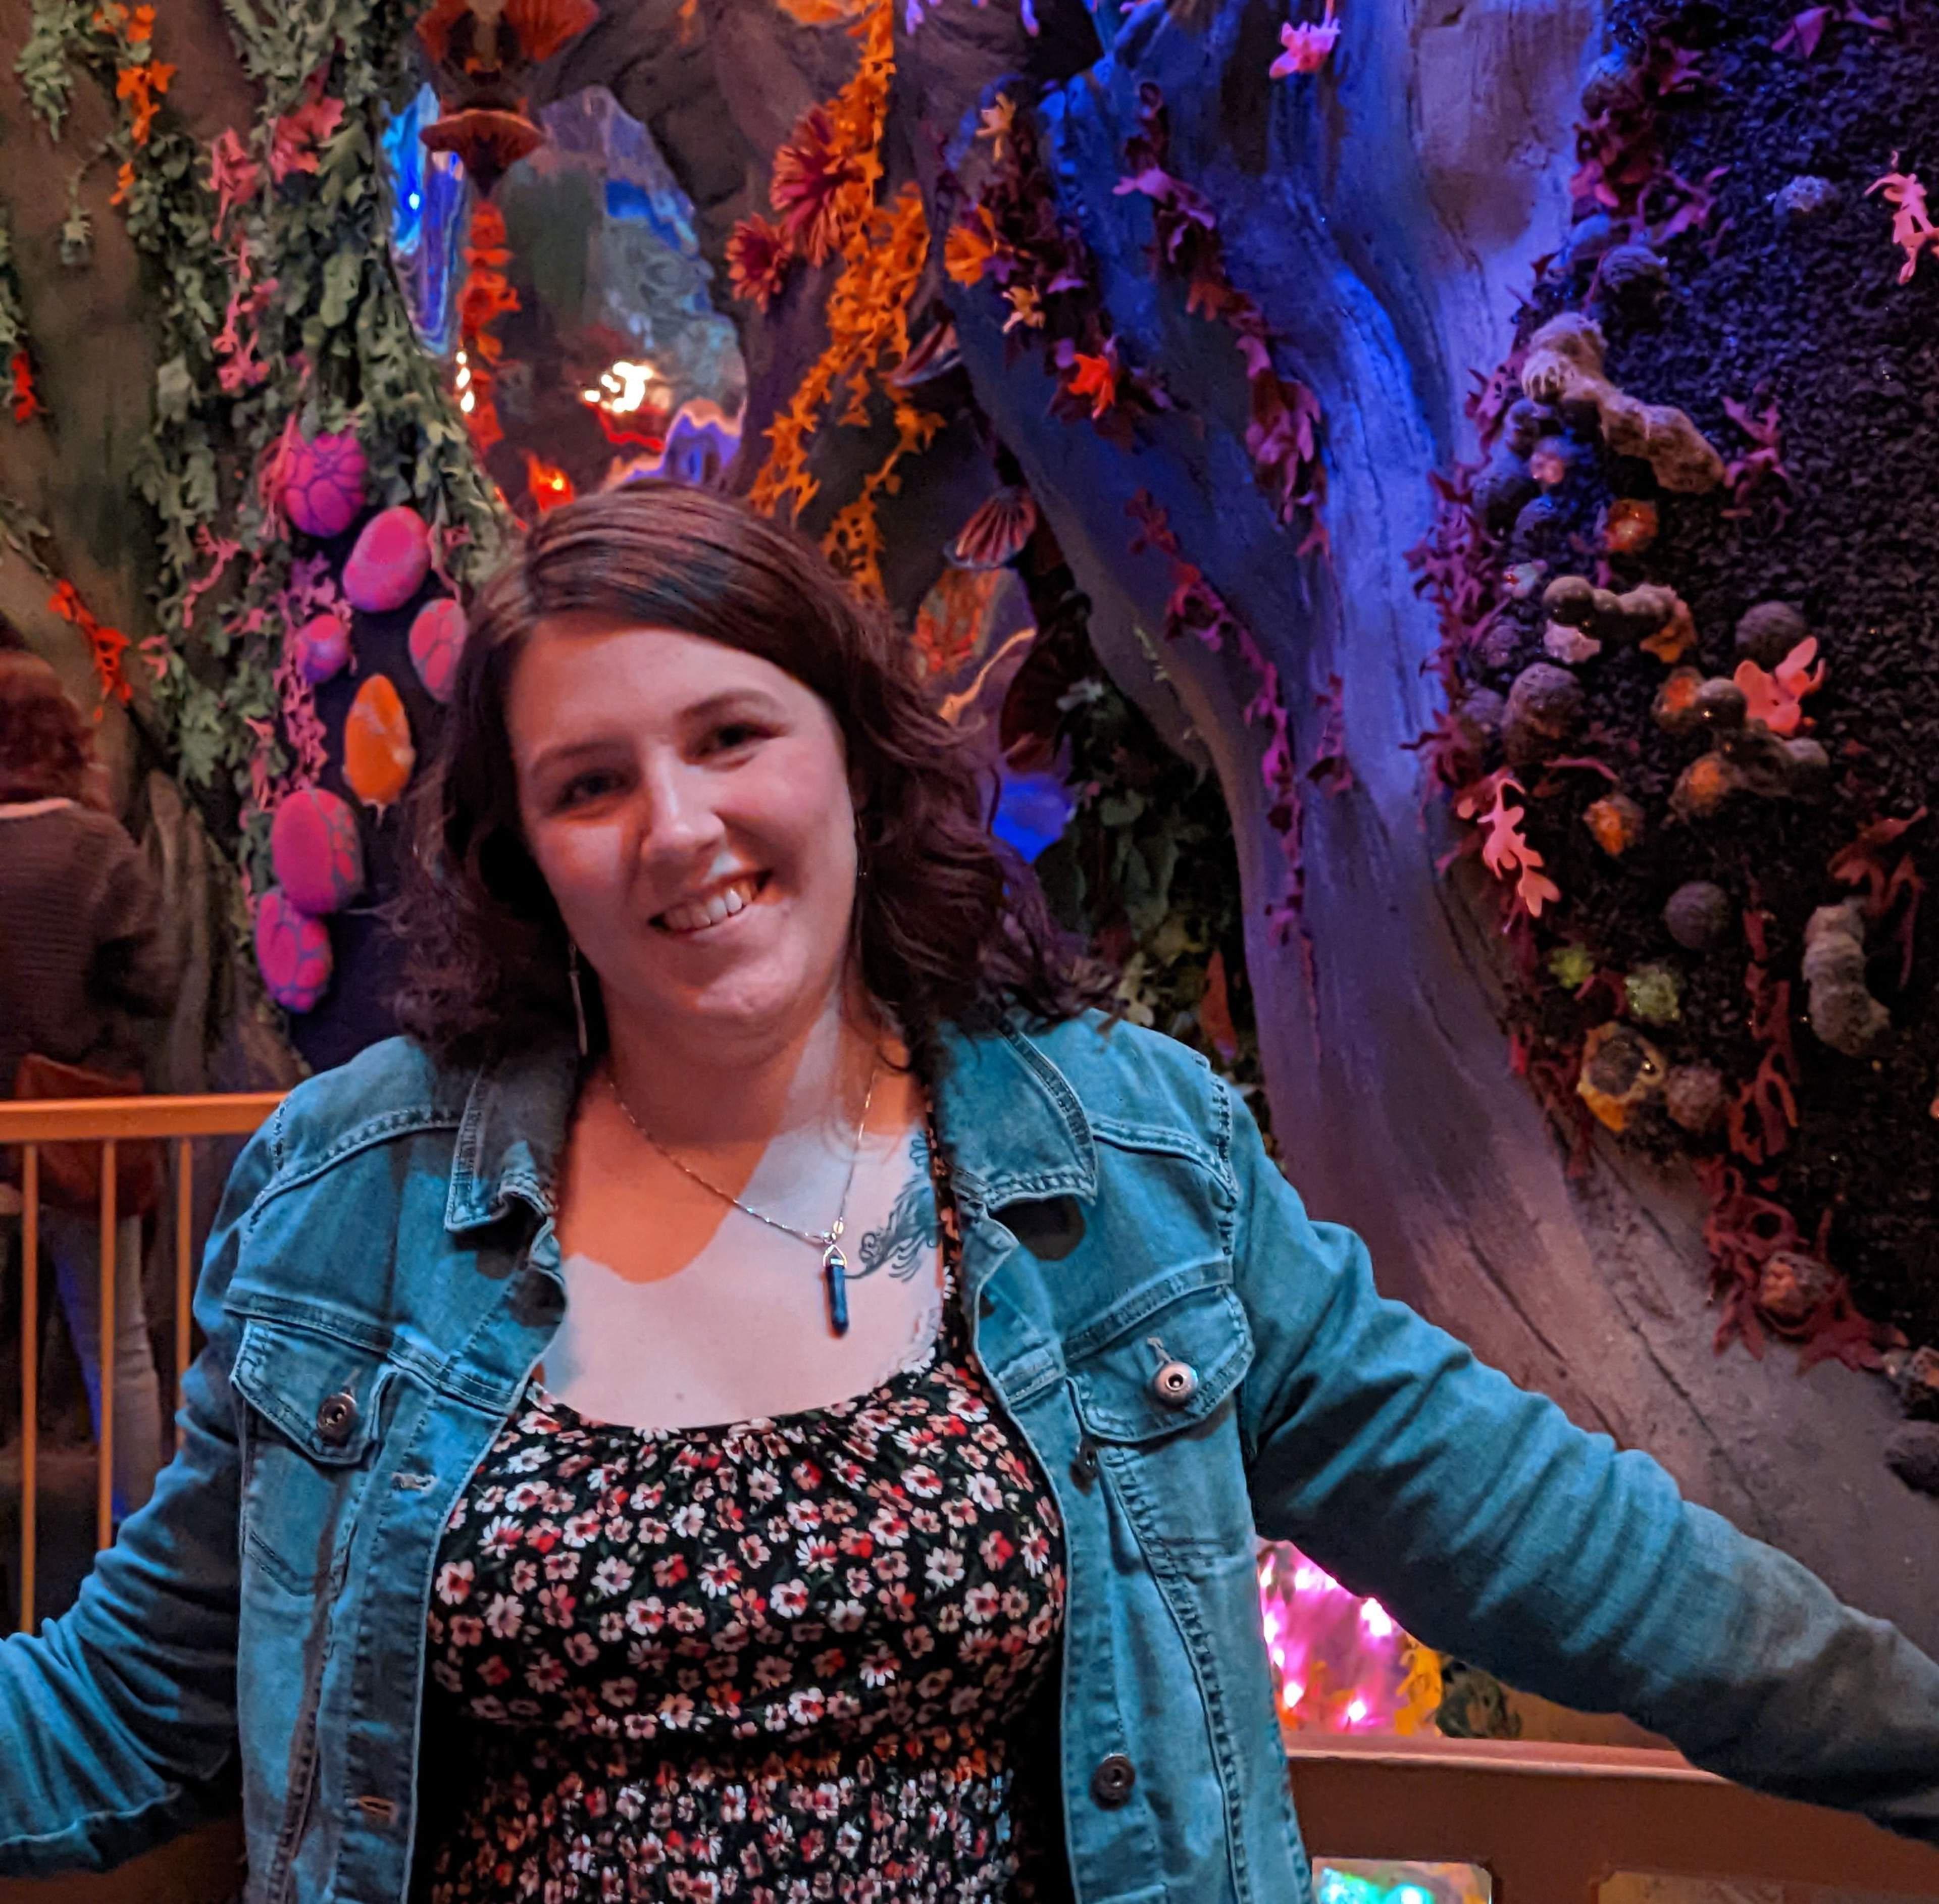 A photo of a white woman with long brown hair, blue eyes, wearing a big smile. She is standing in a fantasy woods art exhibit of felt trees